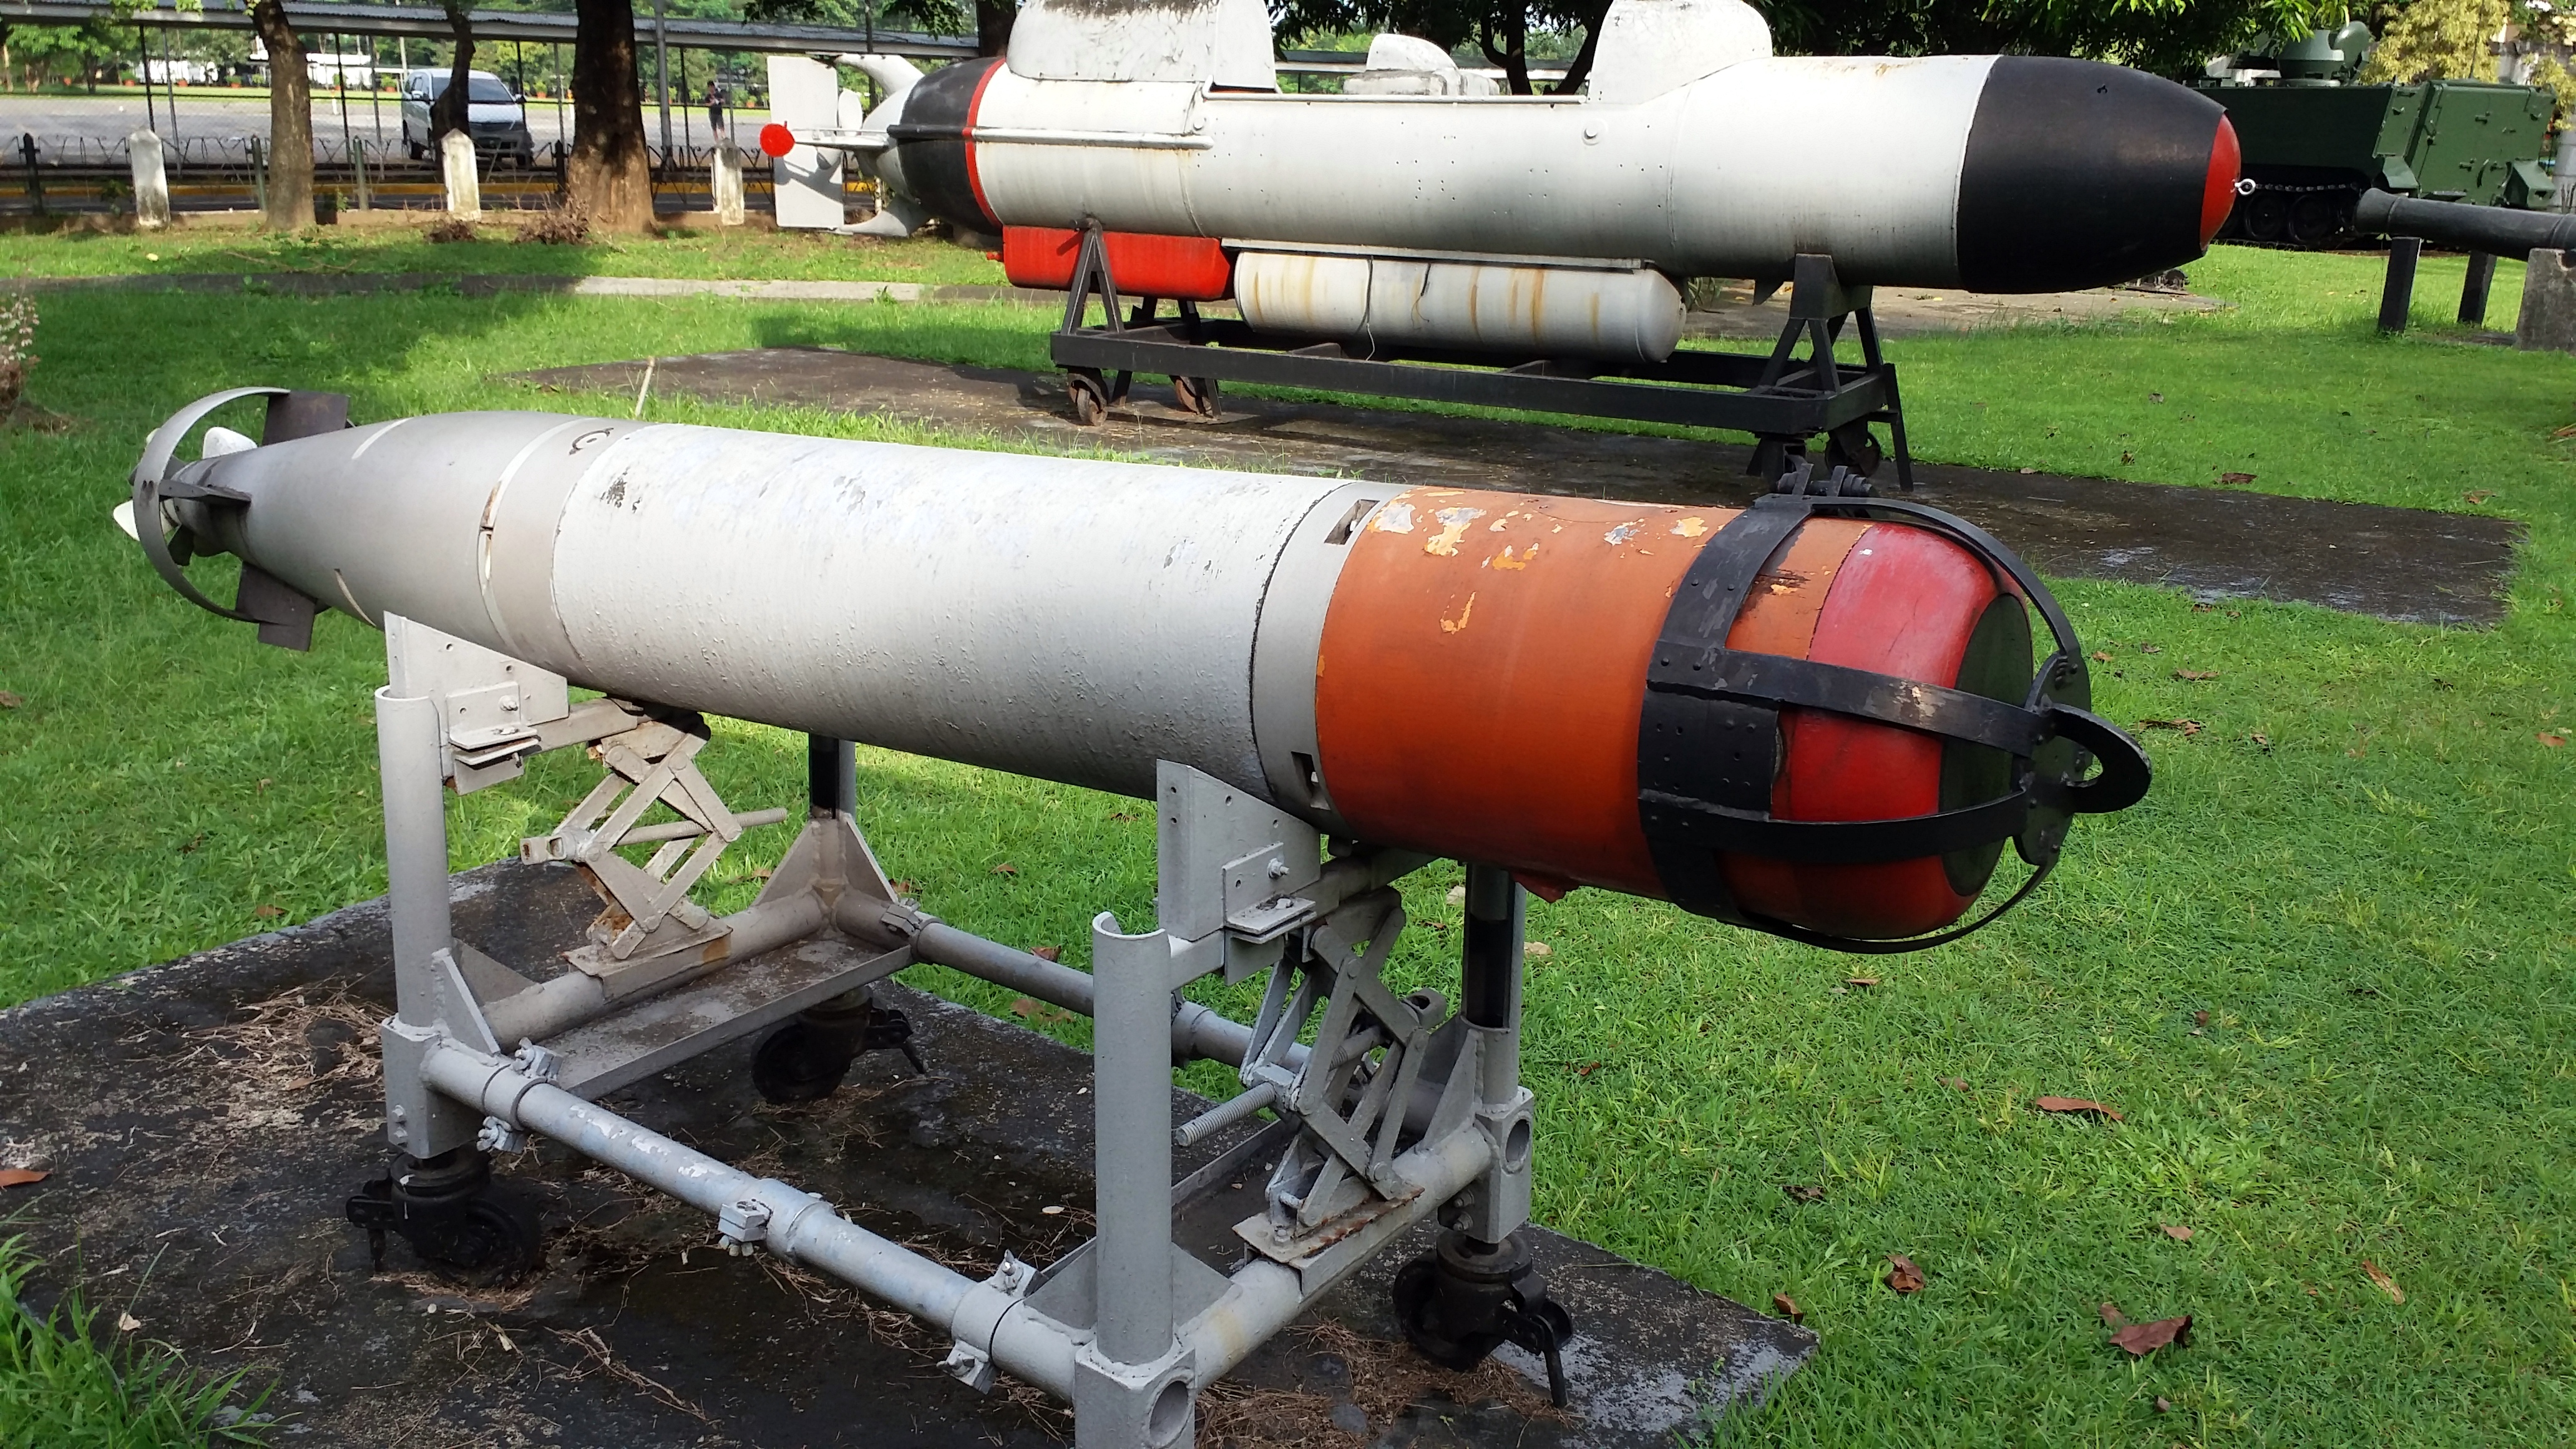 A Mk 44 Light Weight Torpedo of the Philippine Navy. Photo taken at the Armed Forces of the Philippines Museum in Camp Aguinaldo.